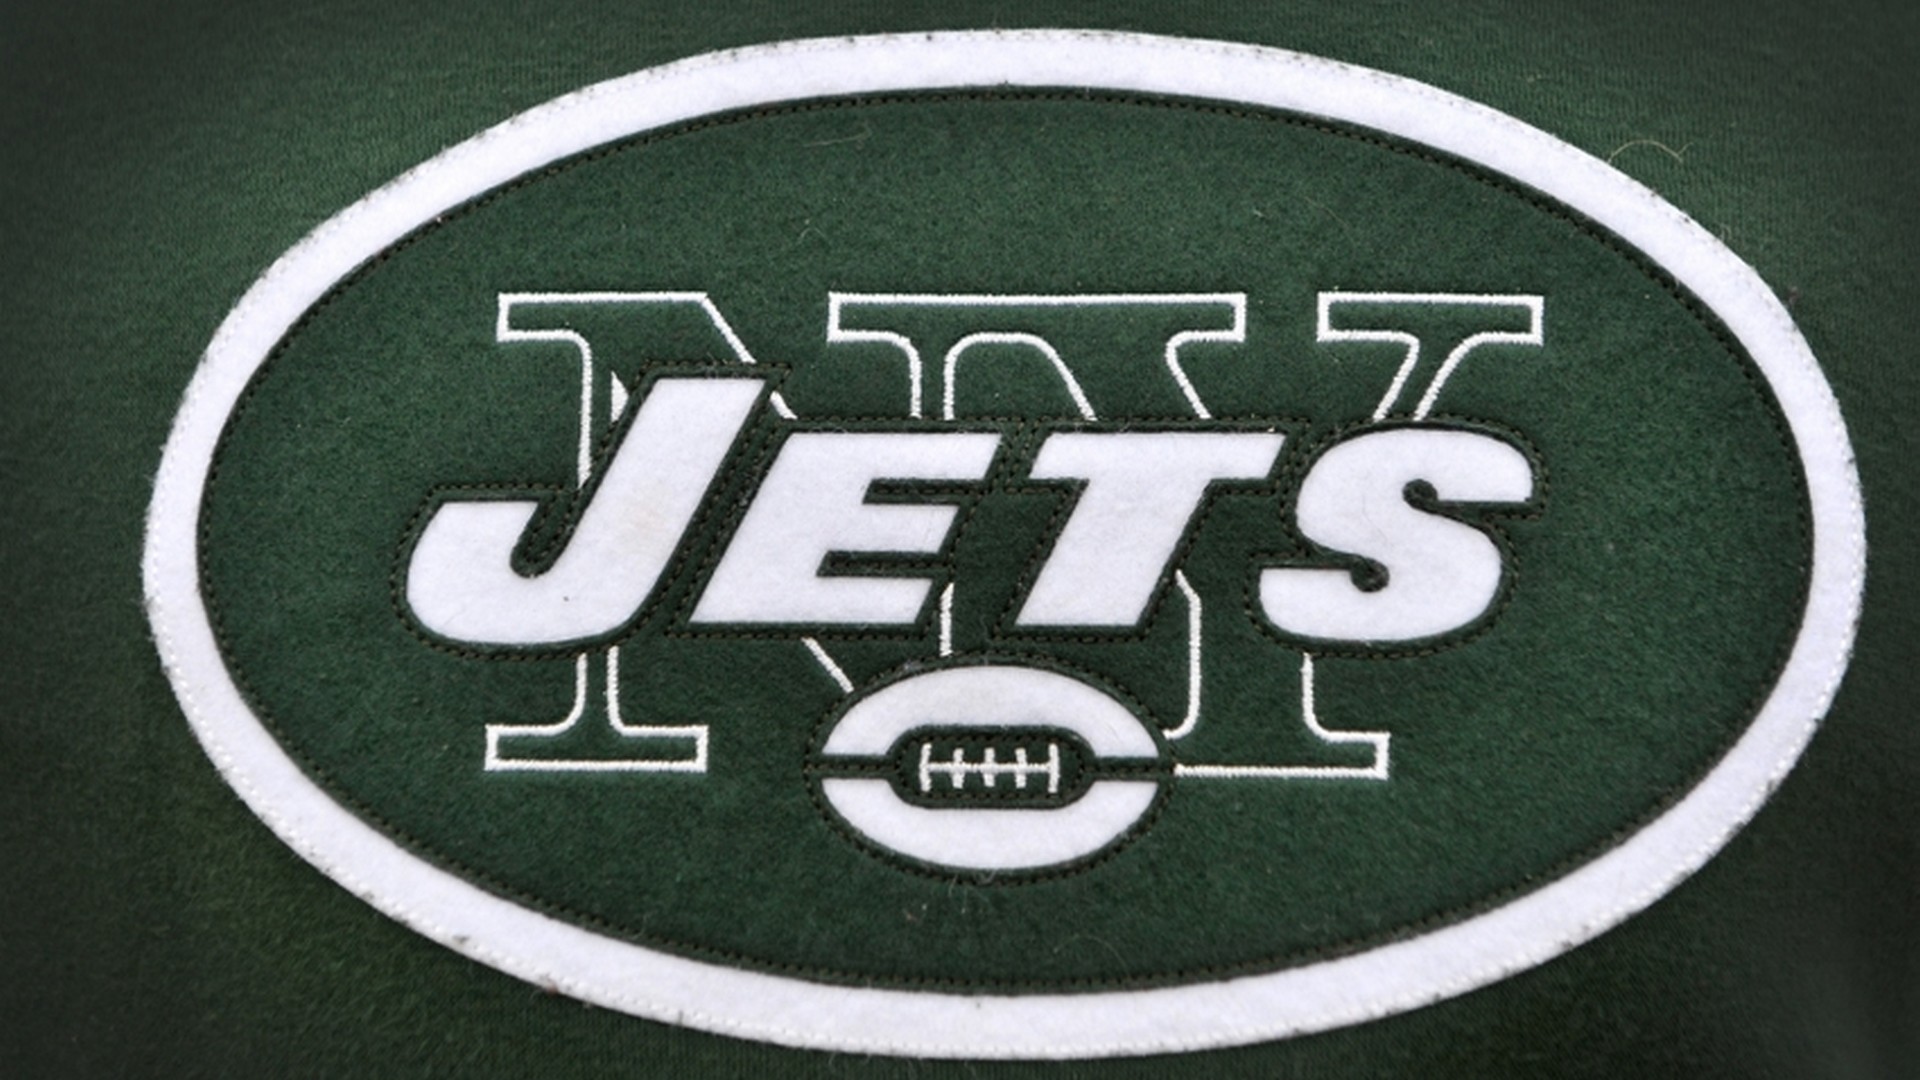 Windows Wallpaper New York Jets with resolution 1920x1080 pixel. You can make this wallpaper for your Mac or Windows Desktop Background, iPhone, Android or Tablet and another Smartphone device